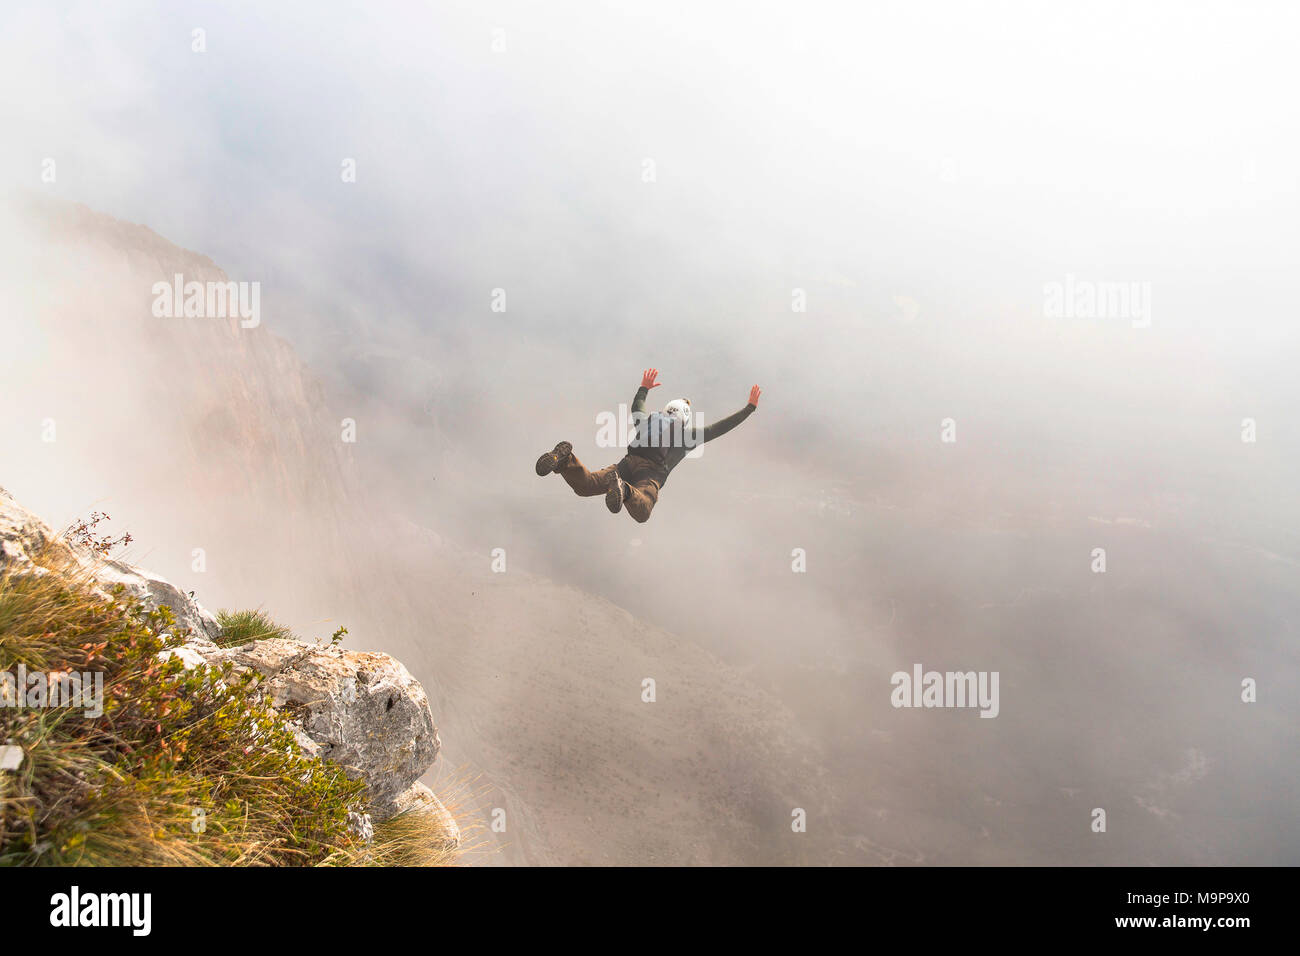 Base jumper mid air right after cliff jump during foggy weather, Brento, Venetien, Italy Stock Photo